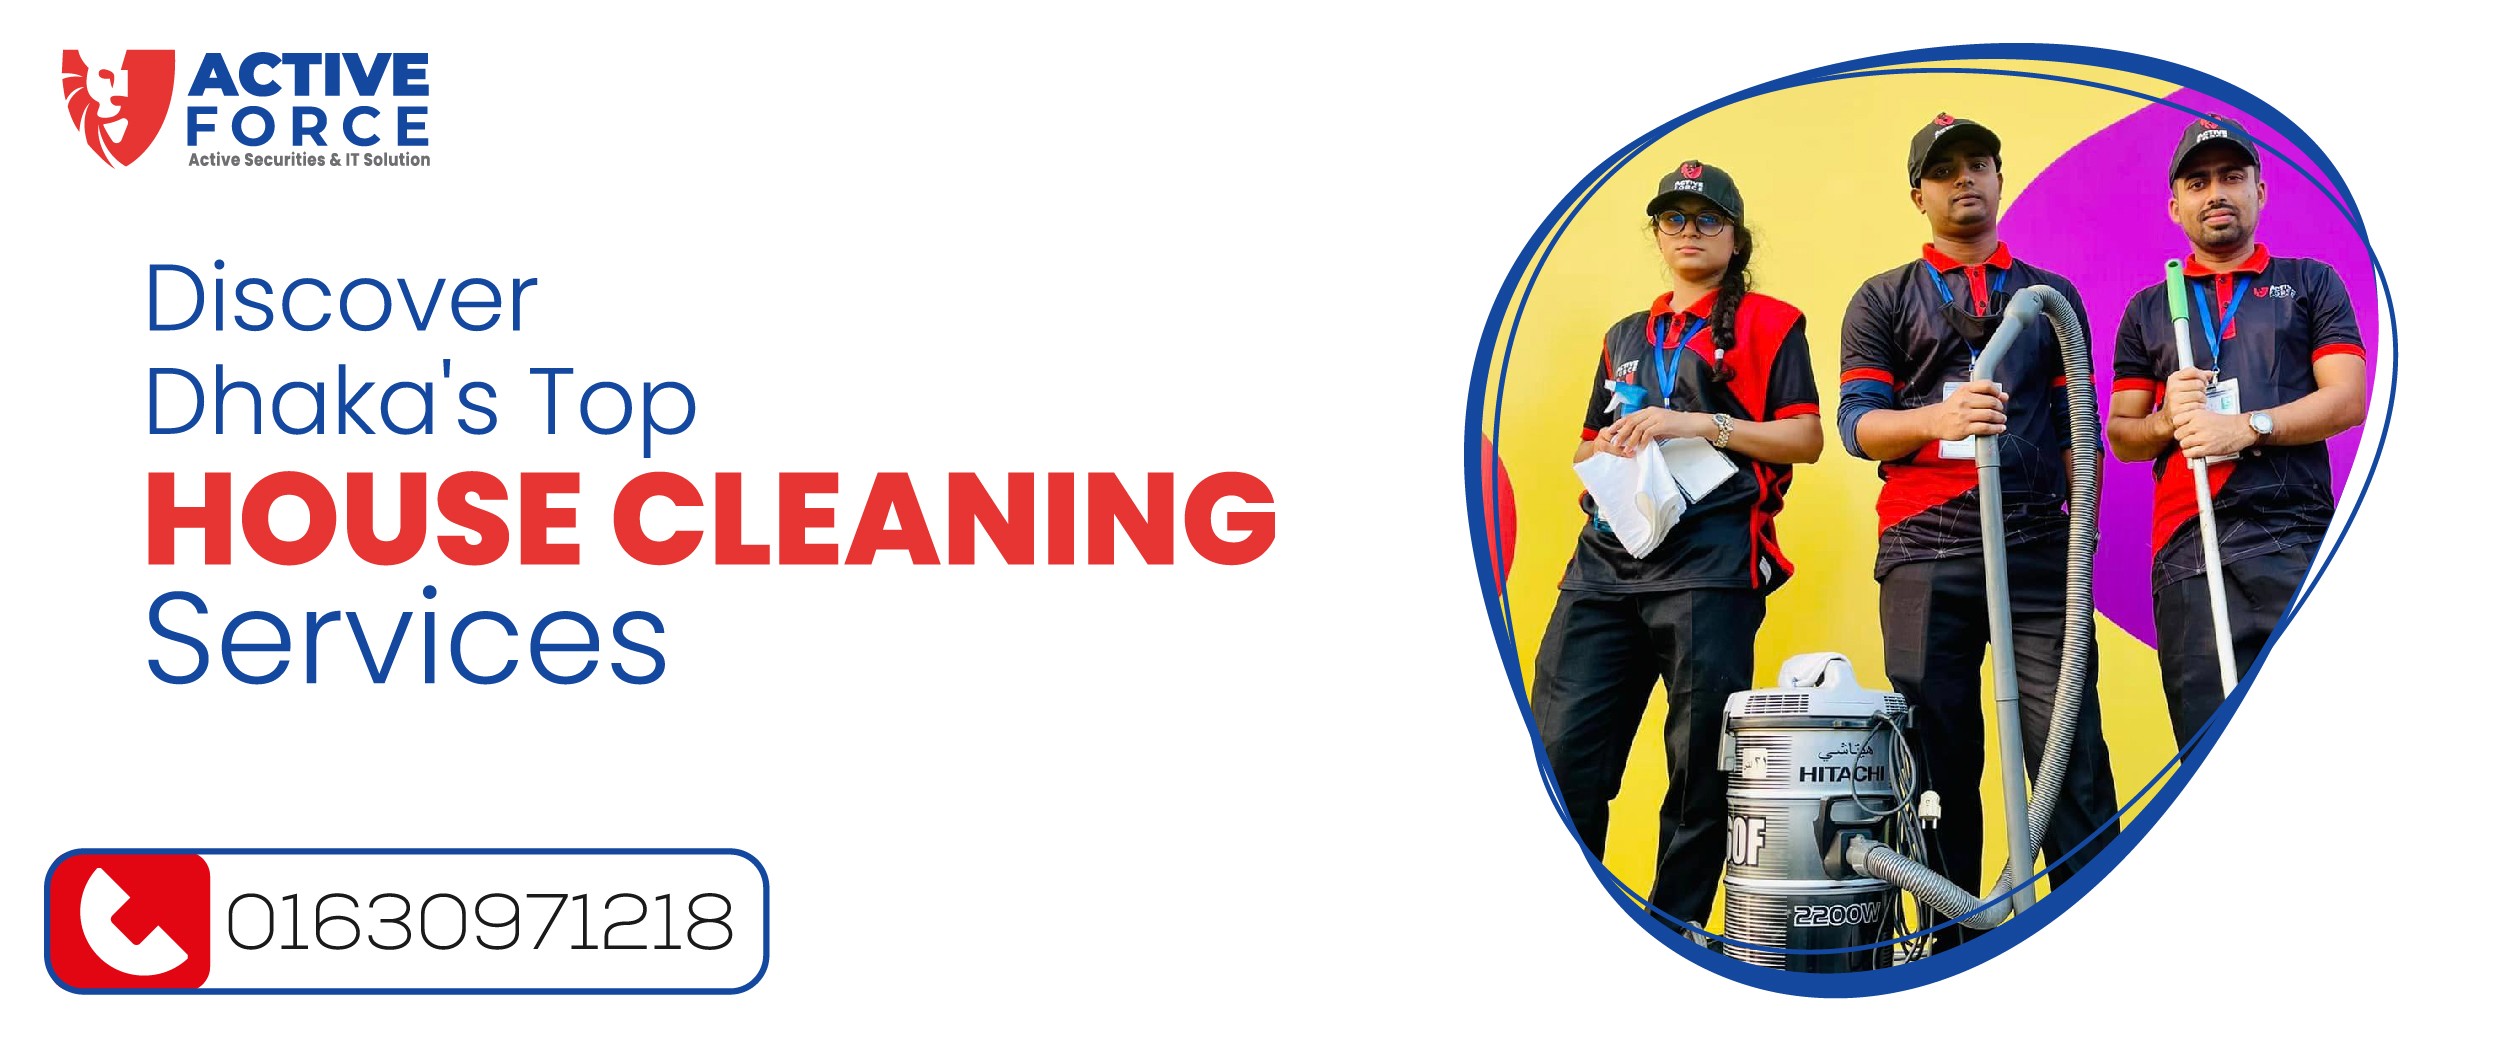 Discover Dhaka's Top House Cleaning Services | Active Force